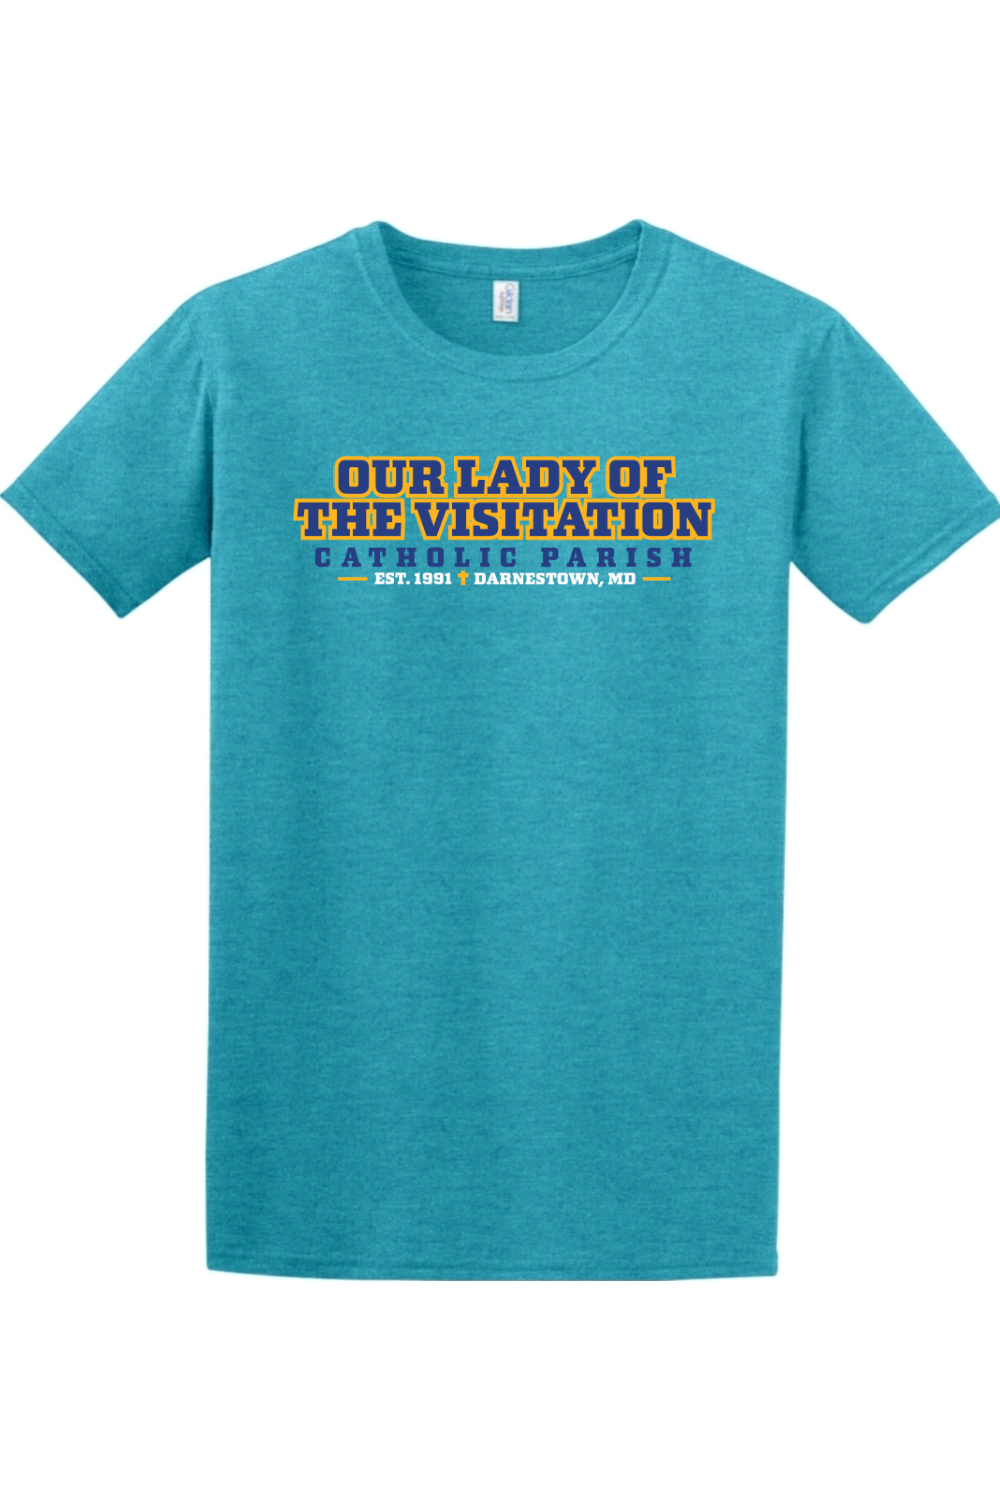 Our Lady of the Visitation Collegiate T-Shirt